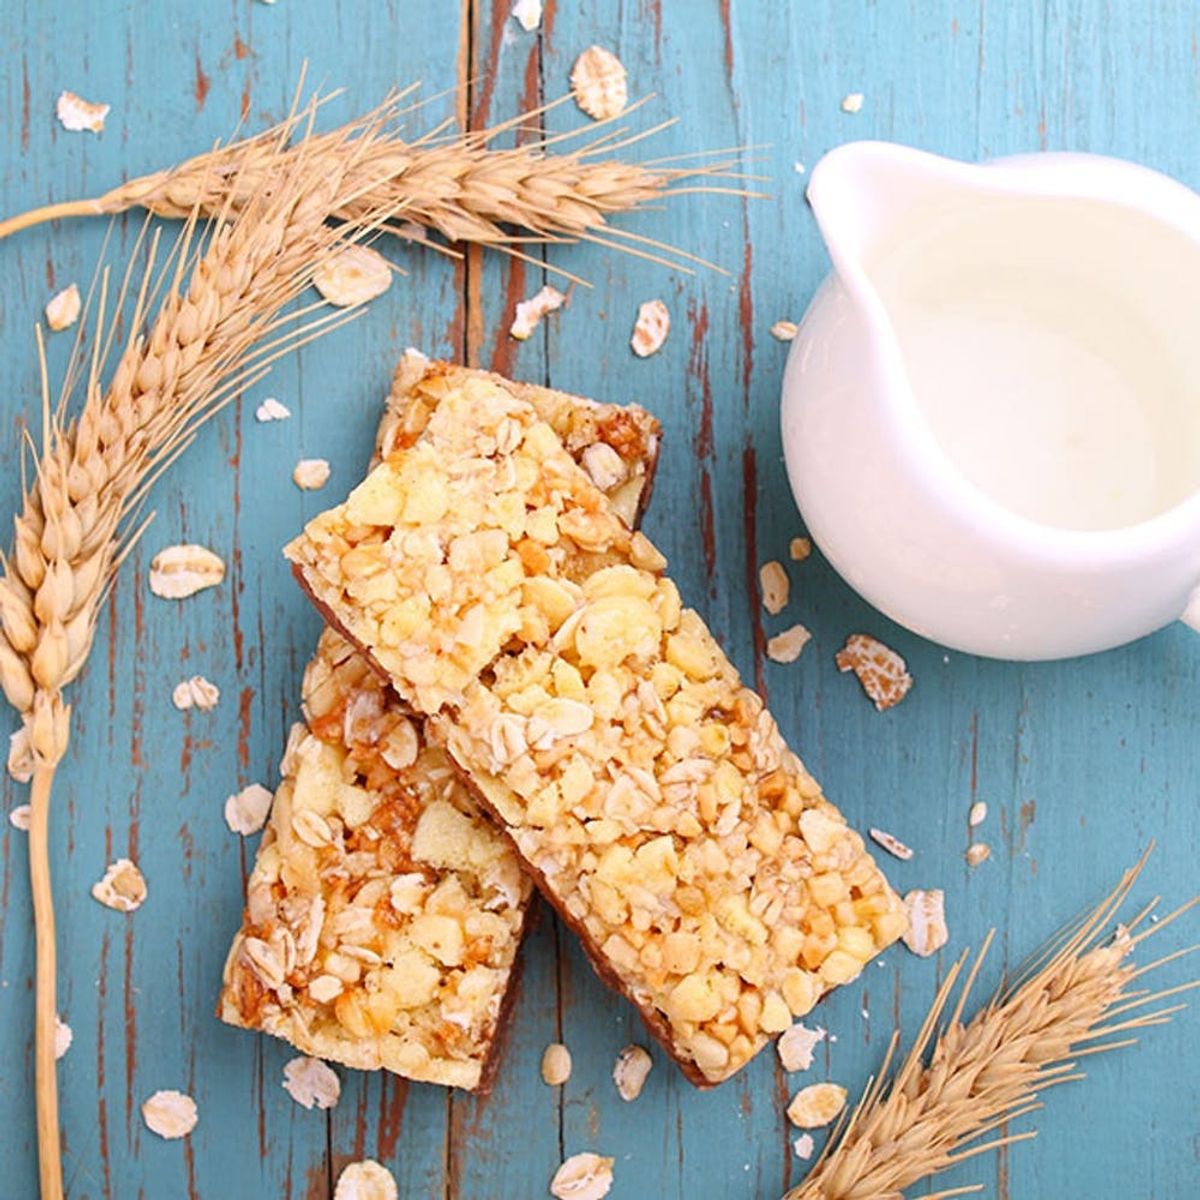 8 Things to Look for in a Healthy Nutrition Bar